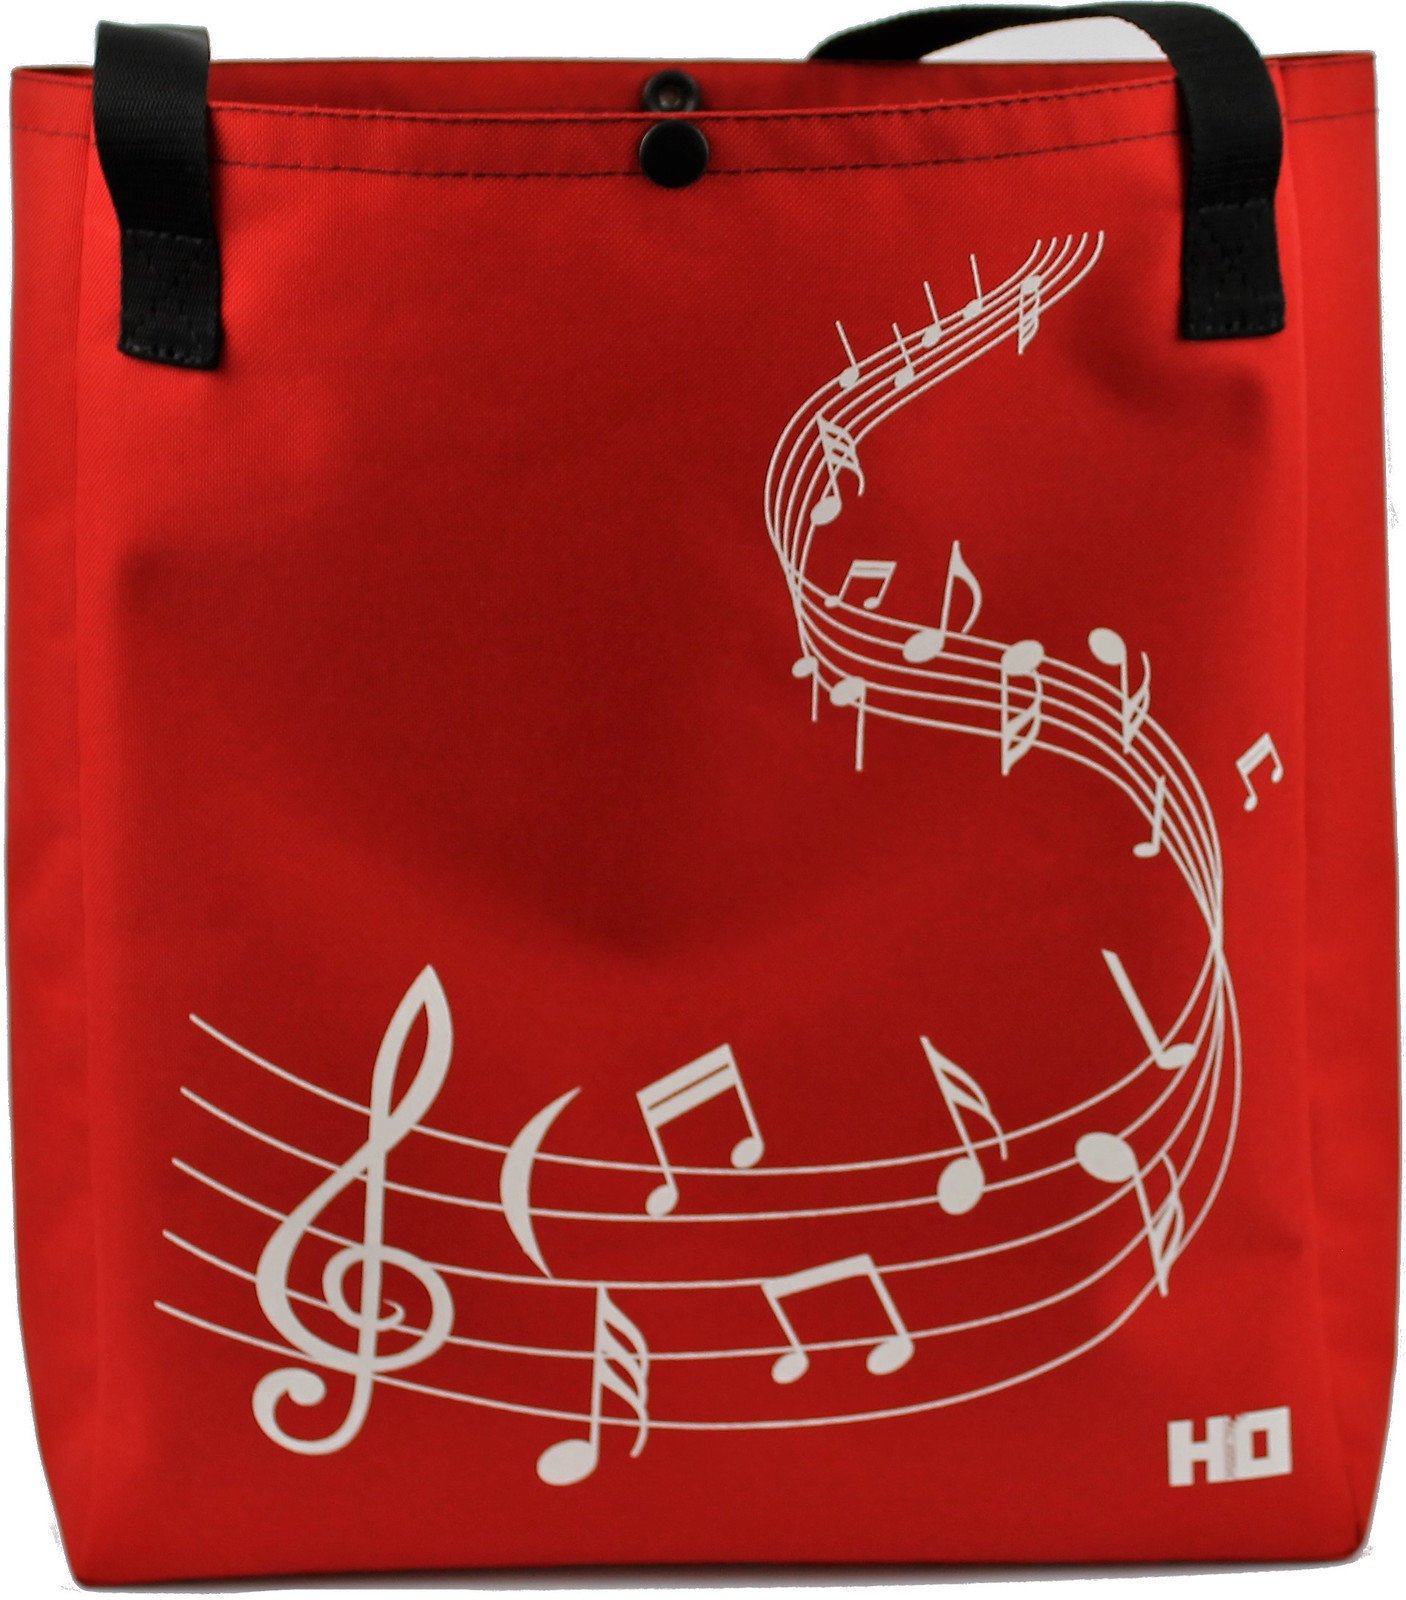 Plastic tas Hudební Obaly H-O Melody Red-Red